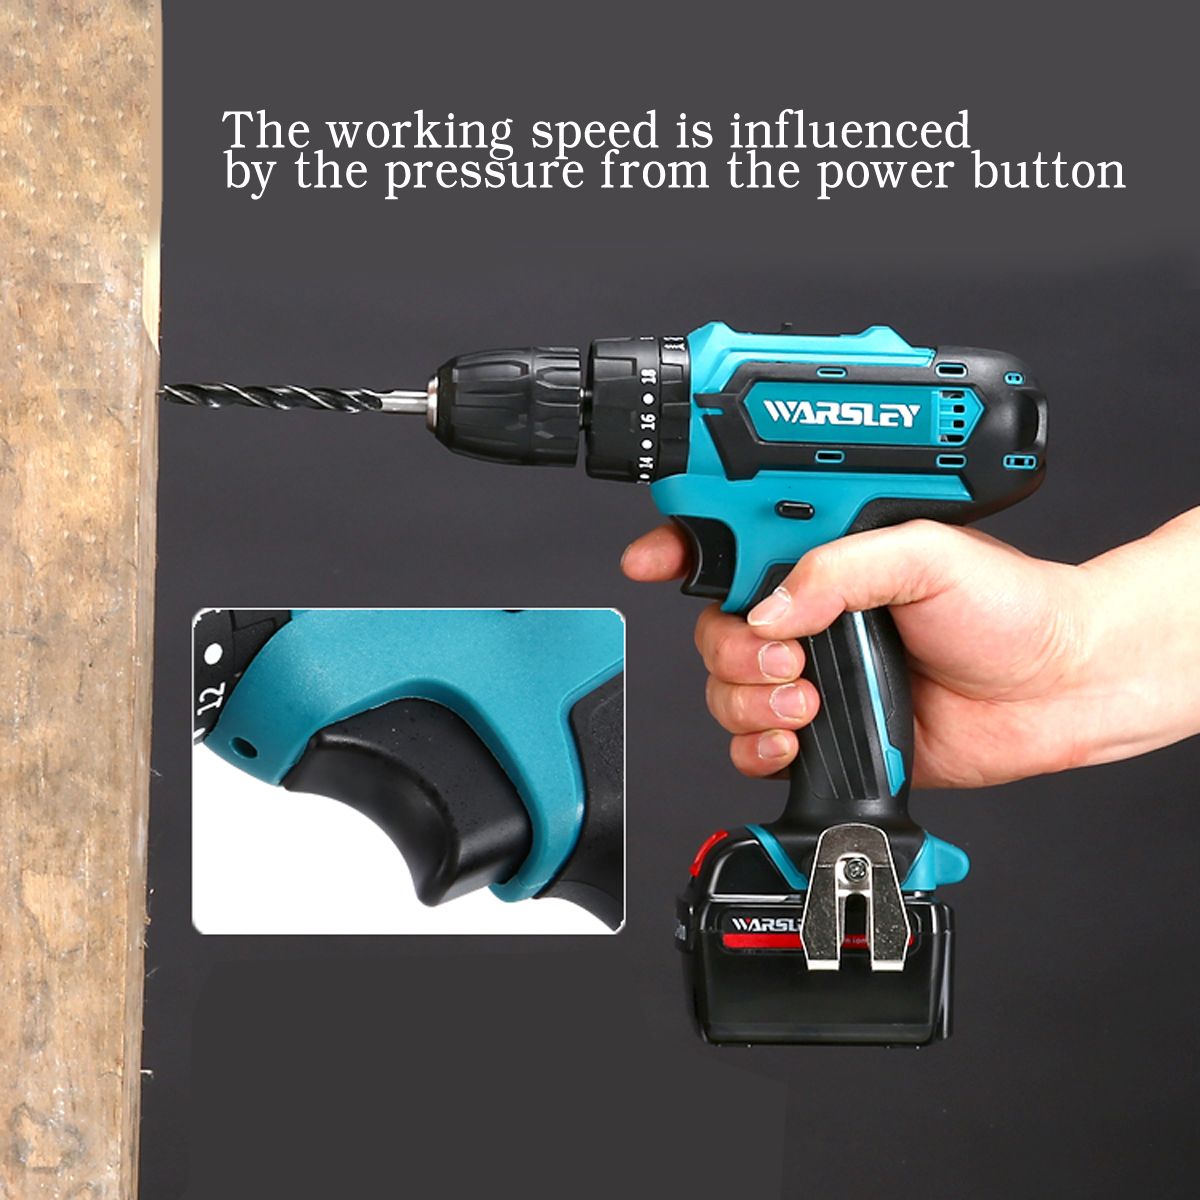 21V-Cordless-Impact-Power-Drill-Rechargeable-2-Speed-Electric-Screwdriver-Driver-with-2-Batteries-1366233